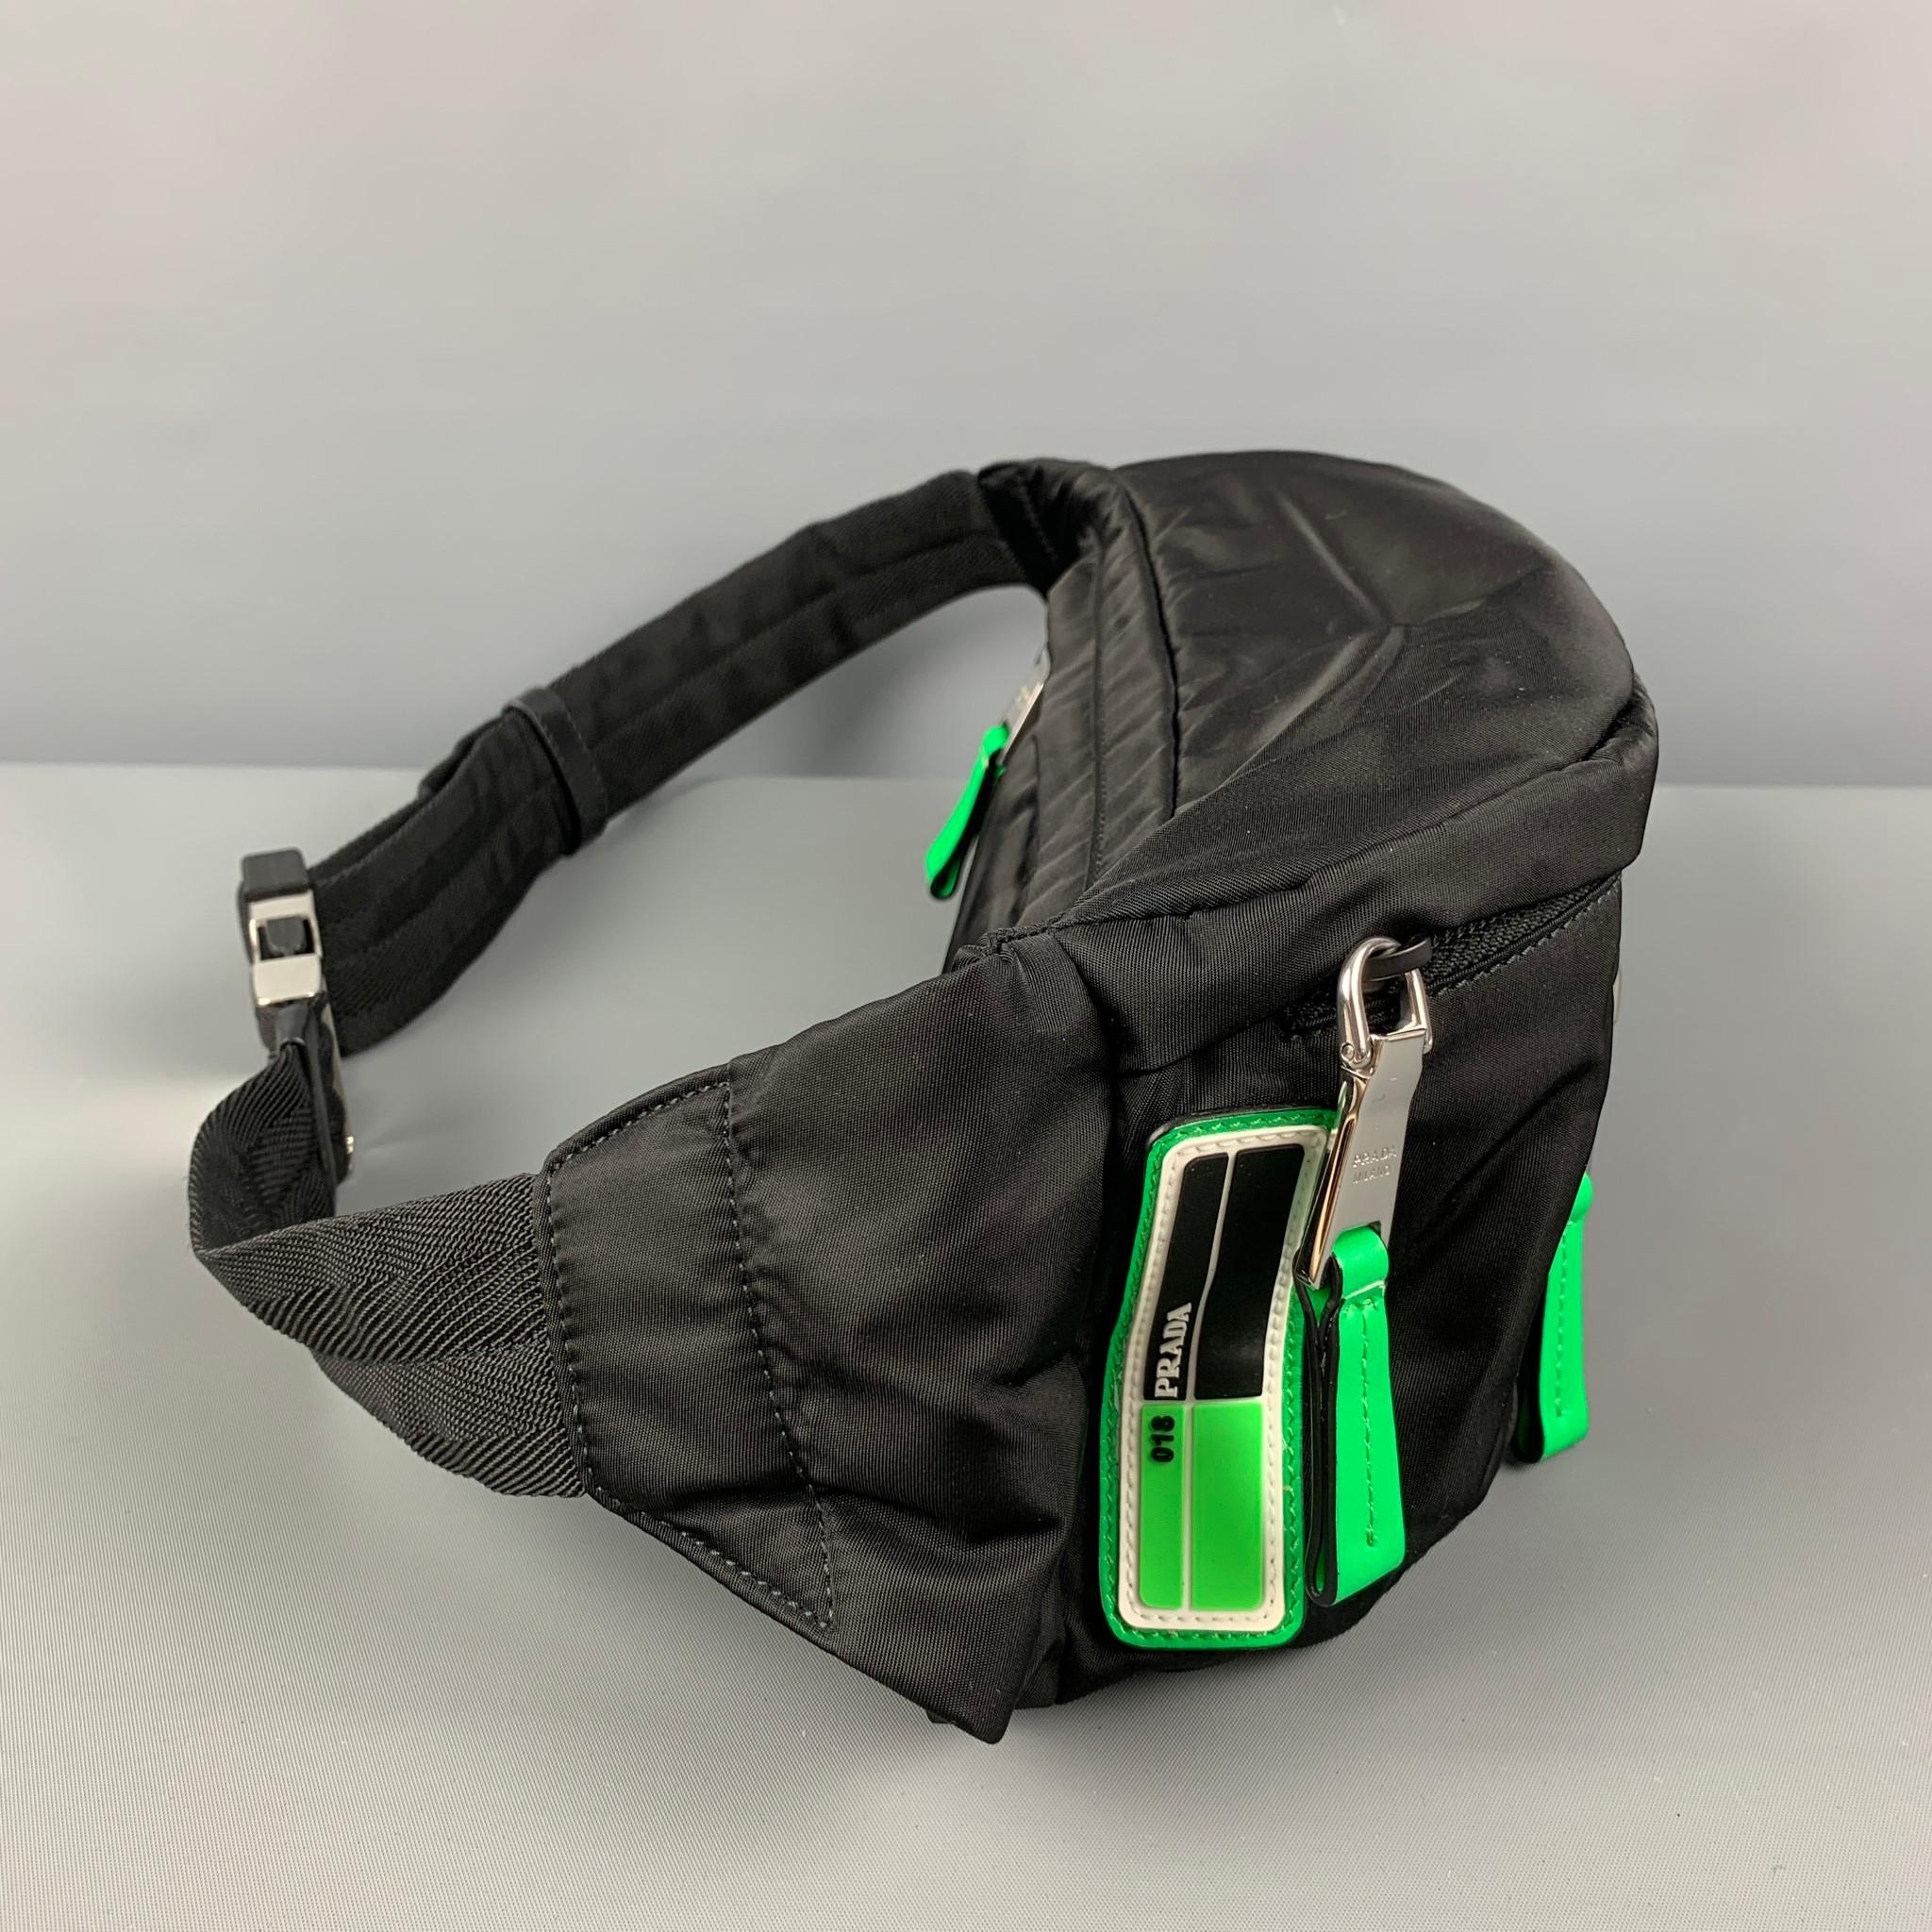 PRADA belt-bag comes in black polyester with neon green details featuring a rubber logo detail, front pockets, silver tone hardware, and a adjustable strap closure. Includes dust bag. 

Very Good Pre-Owned Condition.
Marked: